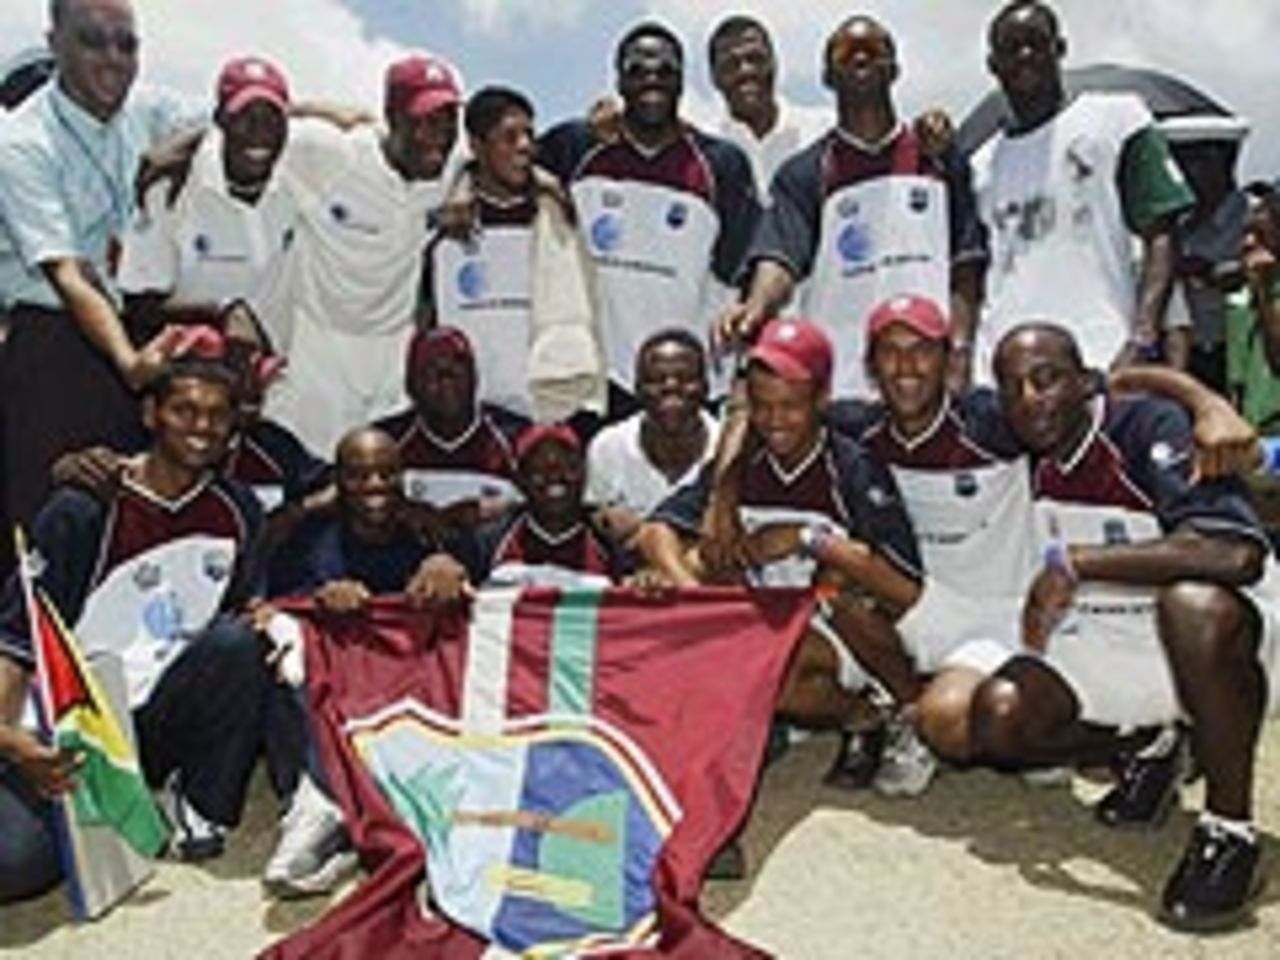 The West Indian team celebrates an historic victory